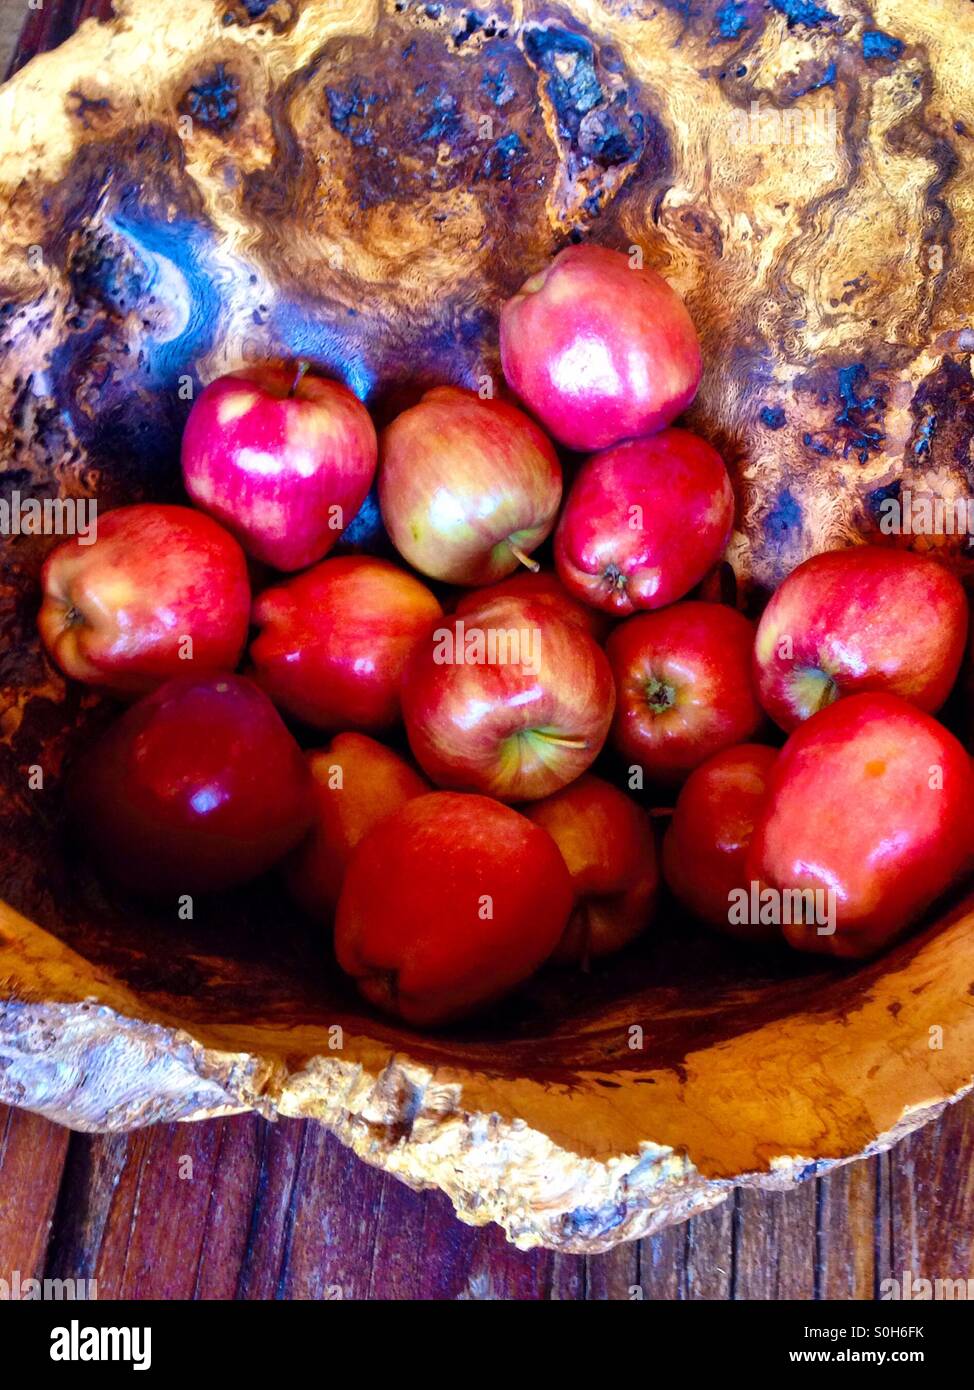 Wooden bowl with red apples Stock Photo